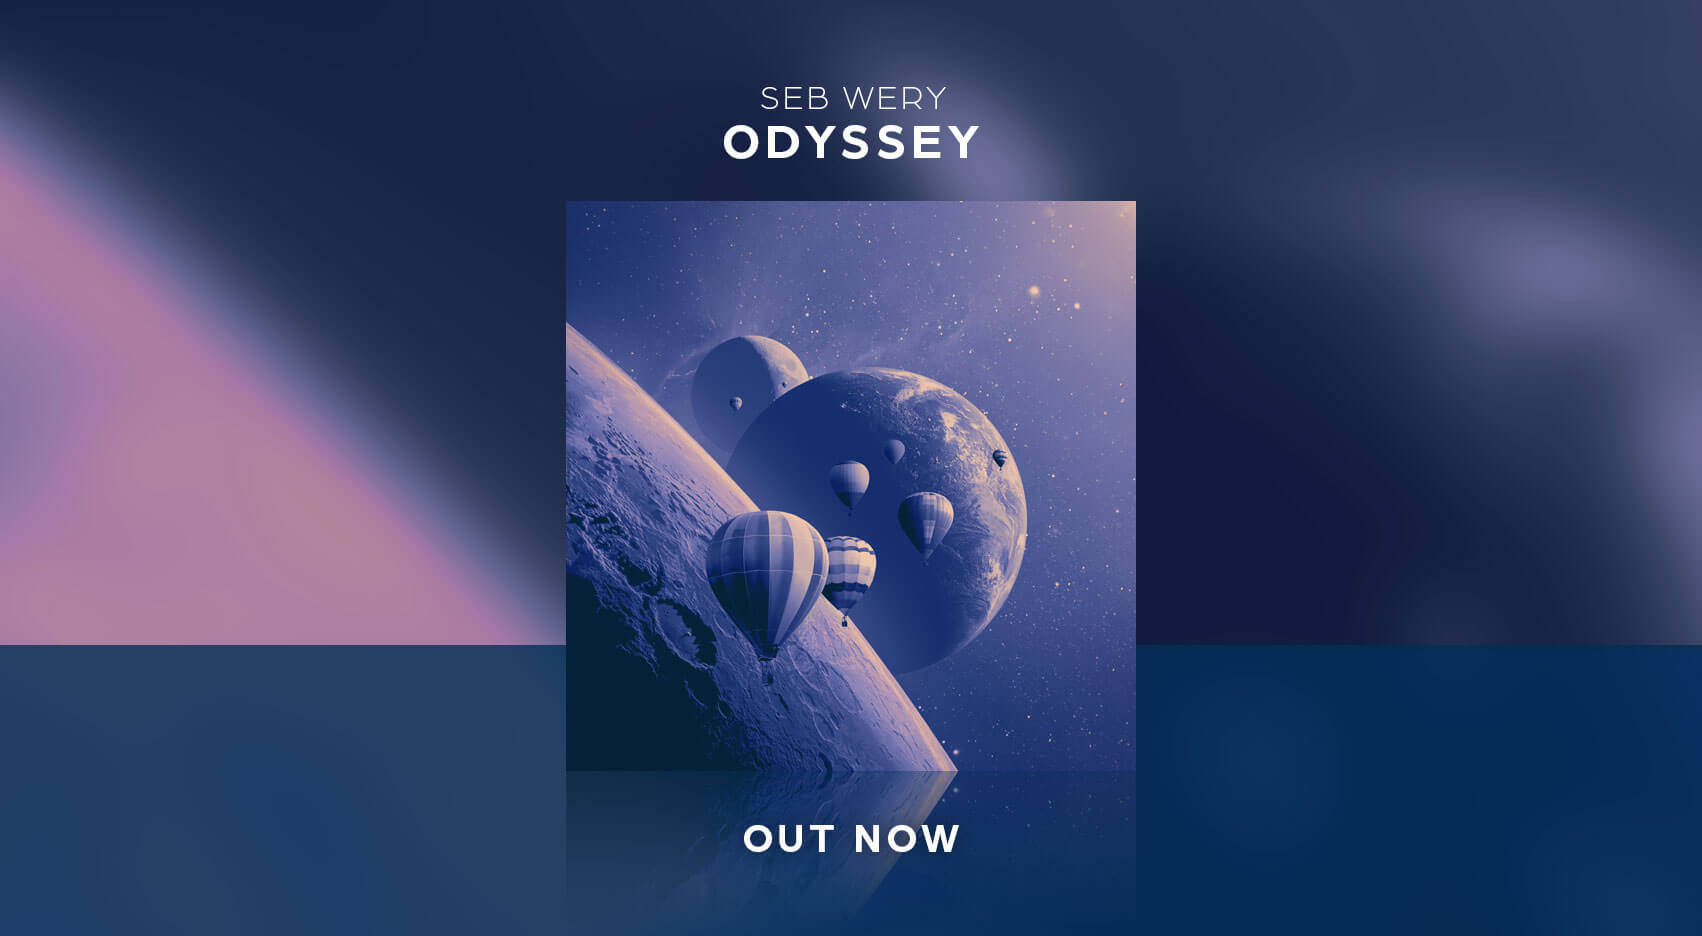 Odyssey is Out Now !